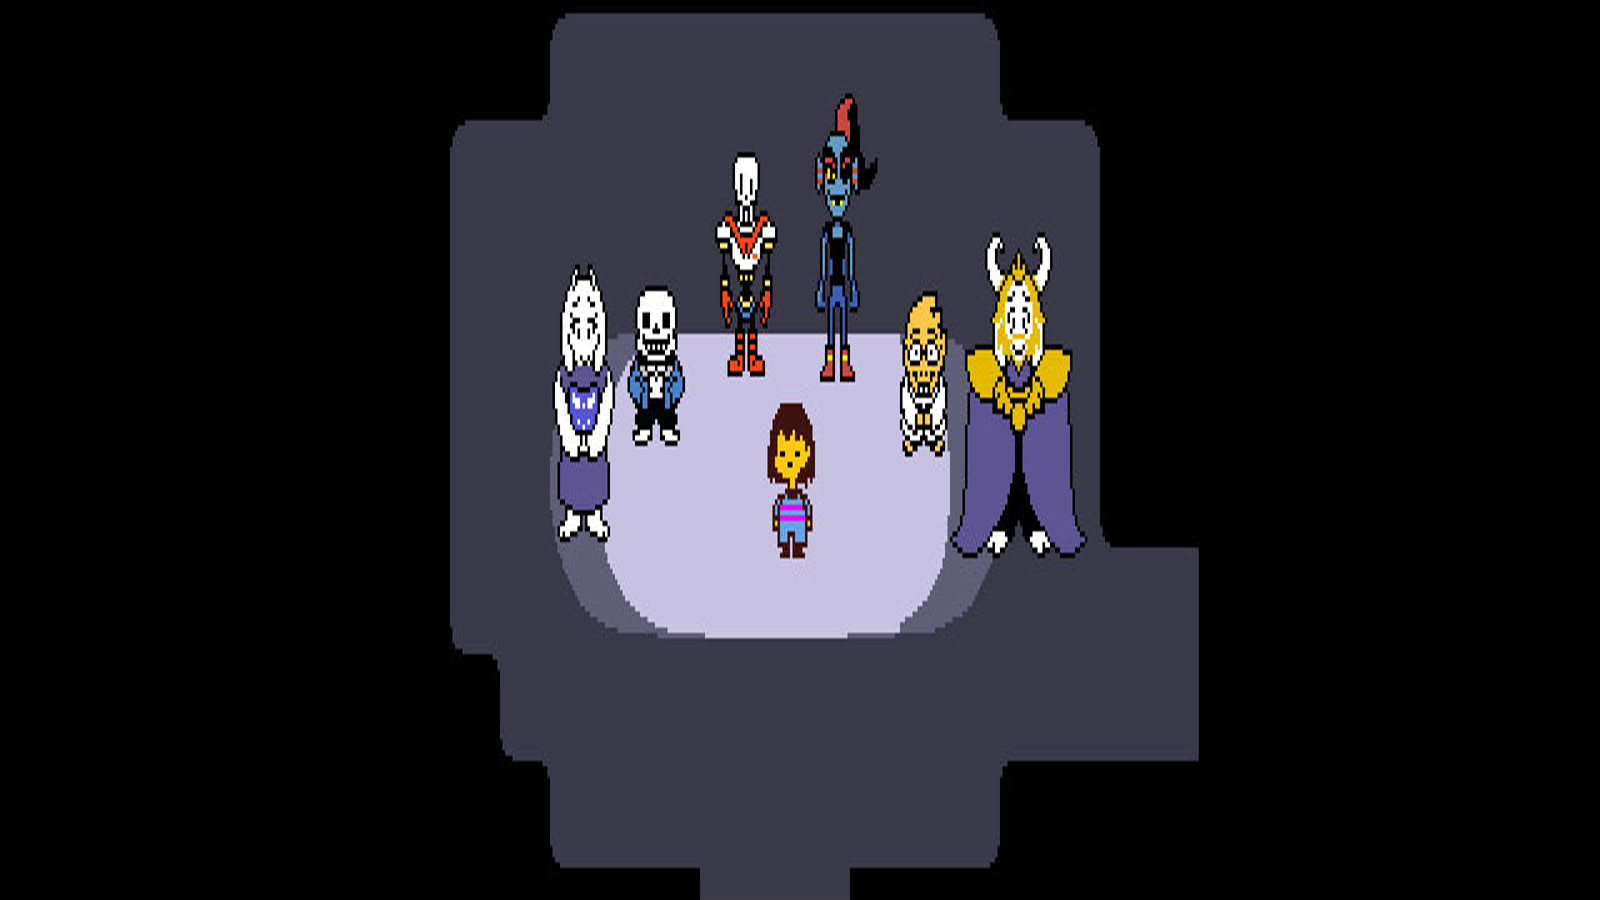 Undertale: Neutral Boss Game Over on Make a GIF